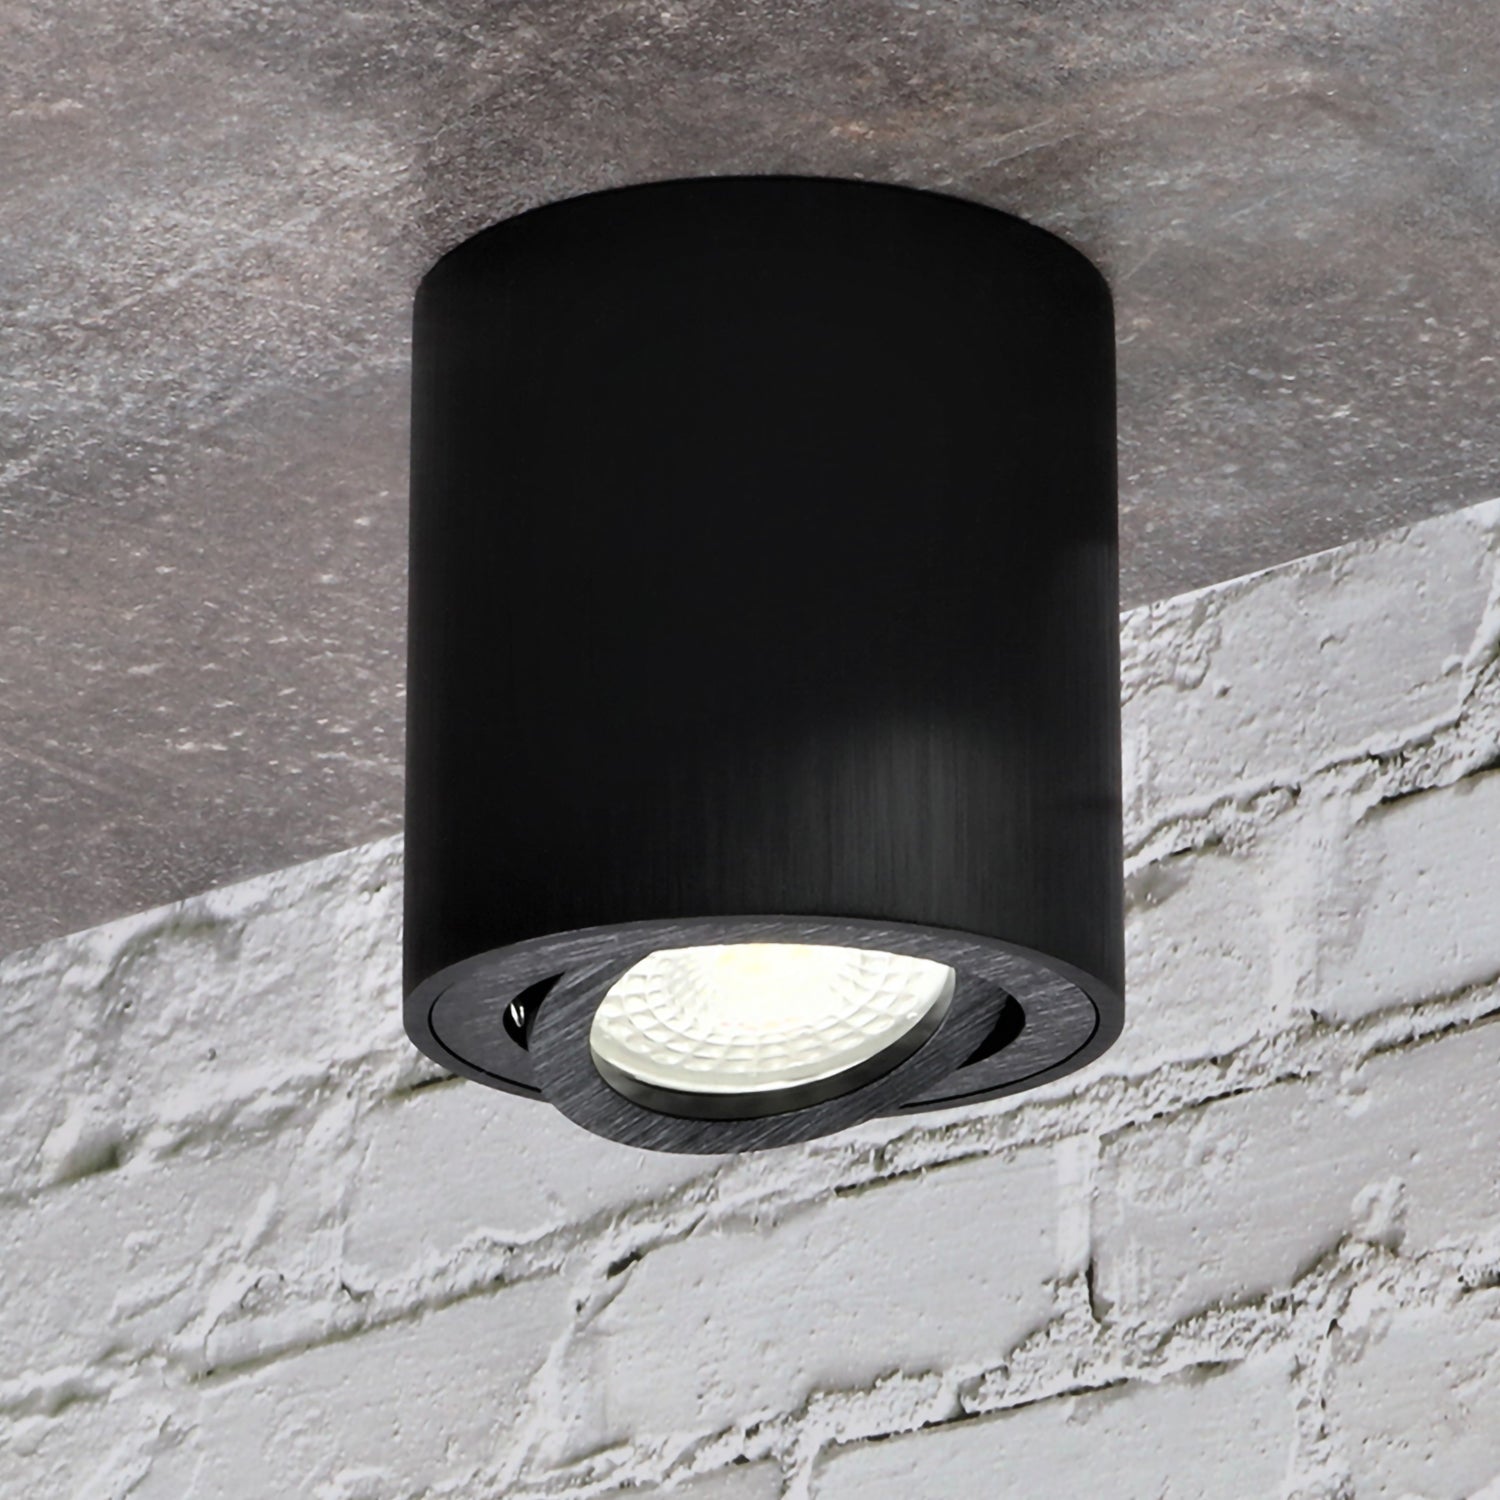 LED spotlight GU10 230V surface-mounted – Milano Surface-mounted Round light Black Dimmable 6.2W ceiling light novoom